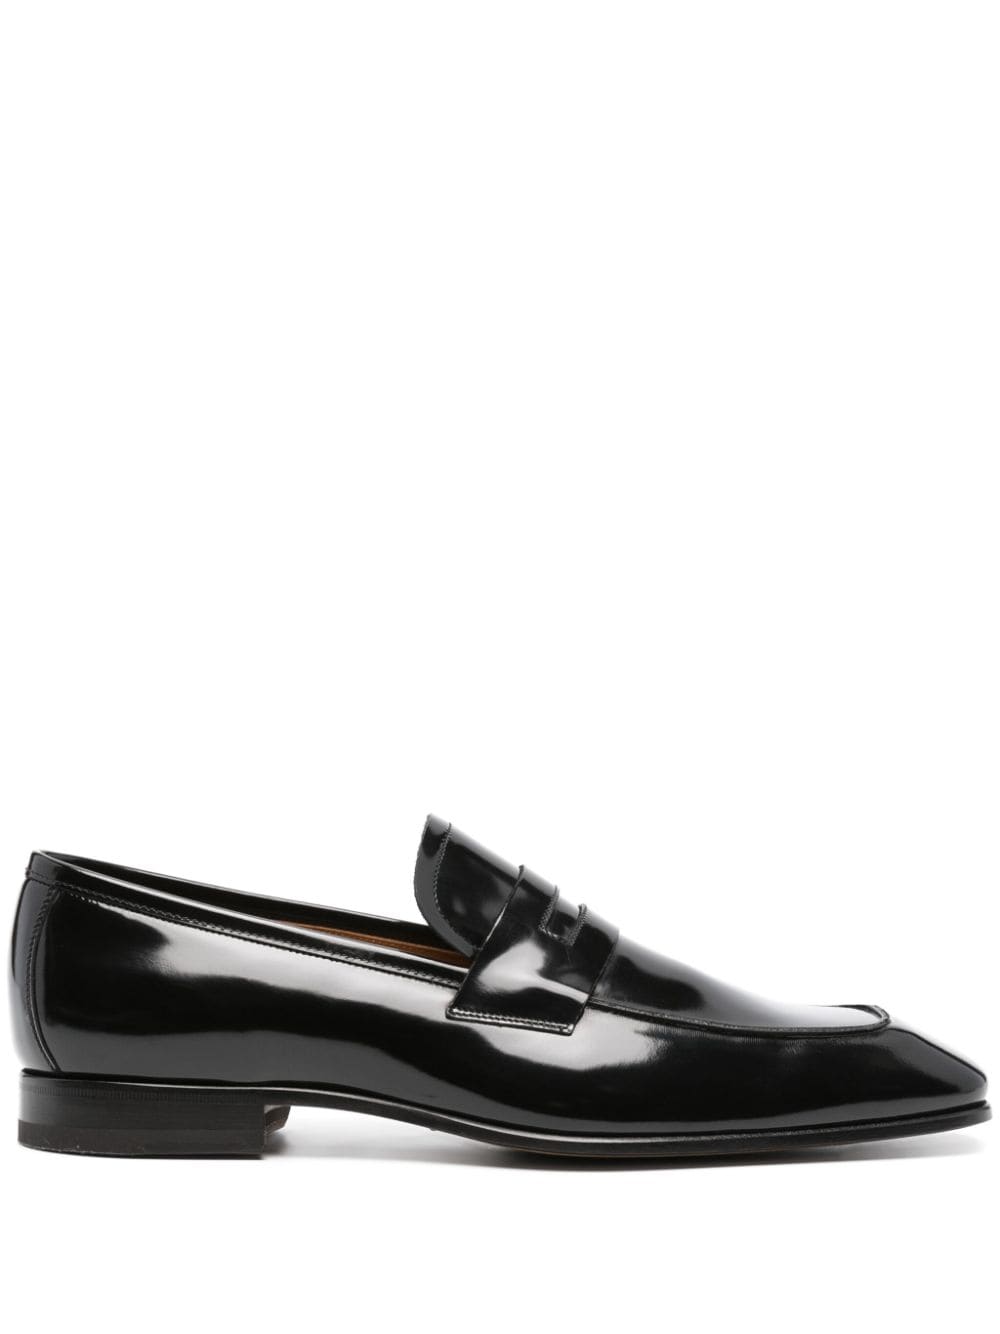 TOM FORD PATENT-LEATHER LOAFERS